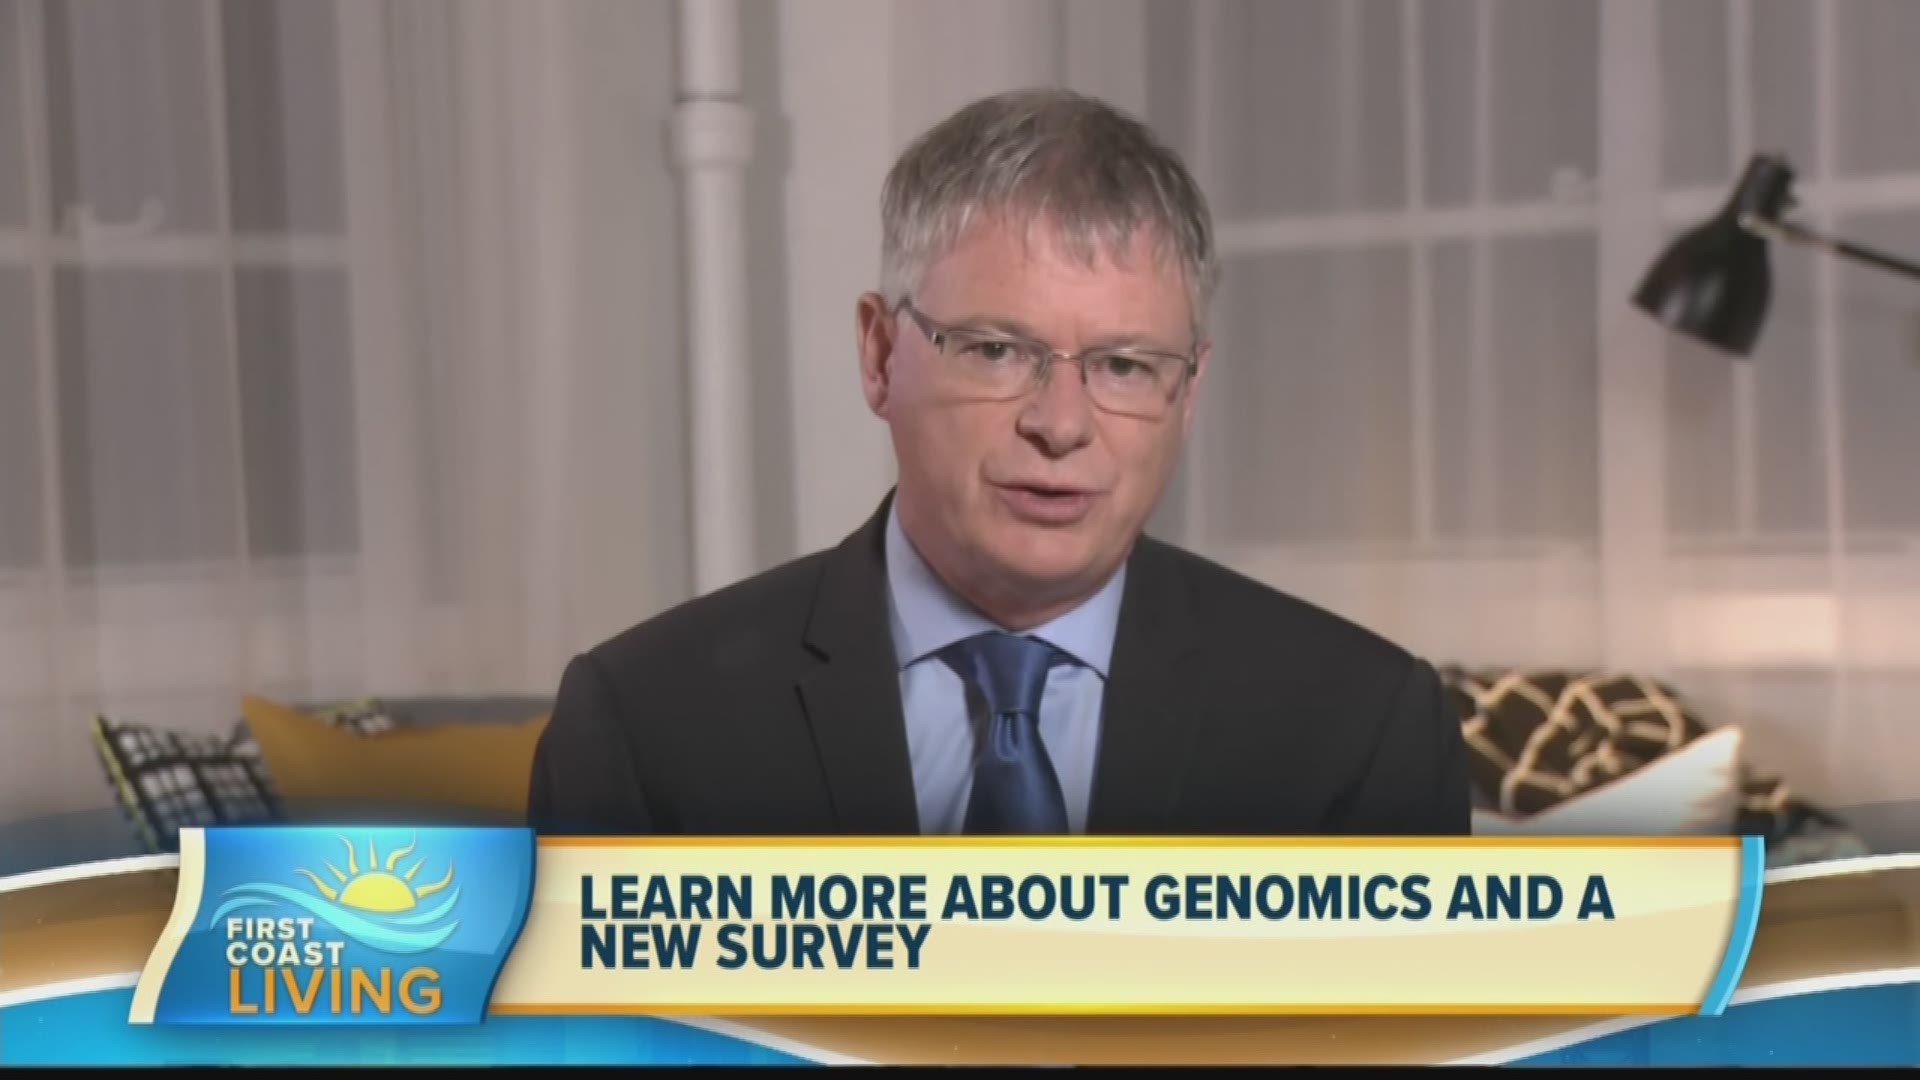 Learn how genetics testing is helping those suffering from rare or serious diseases.